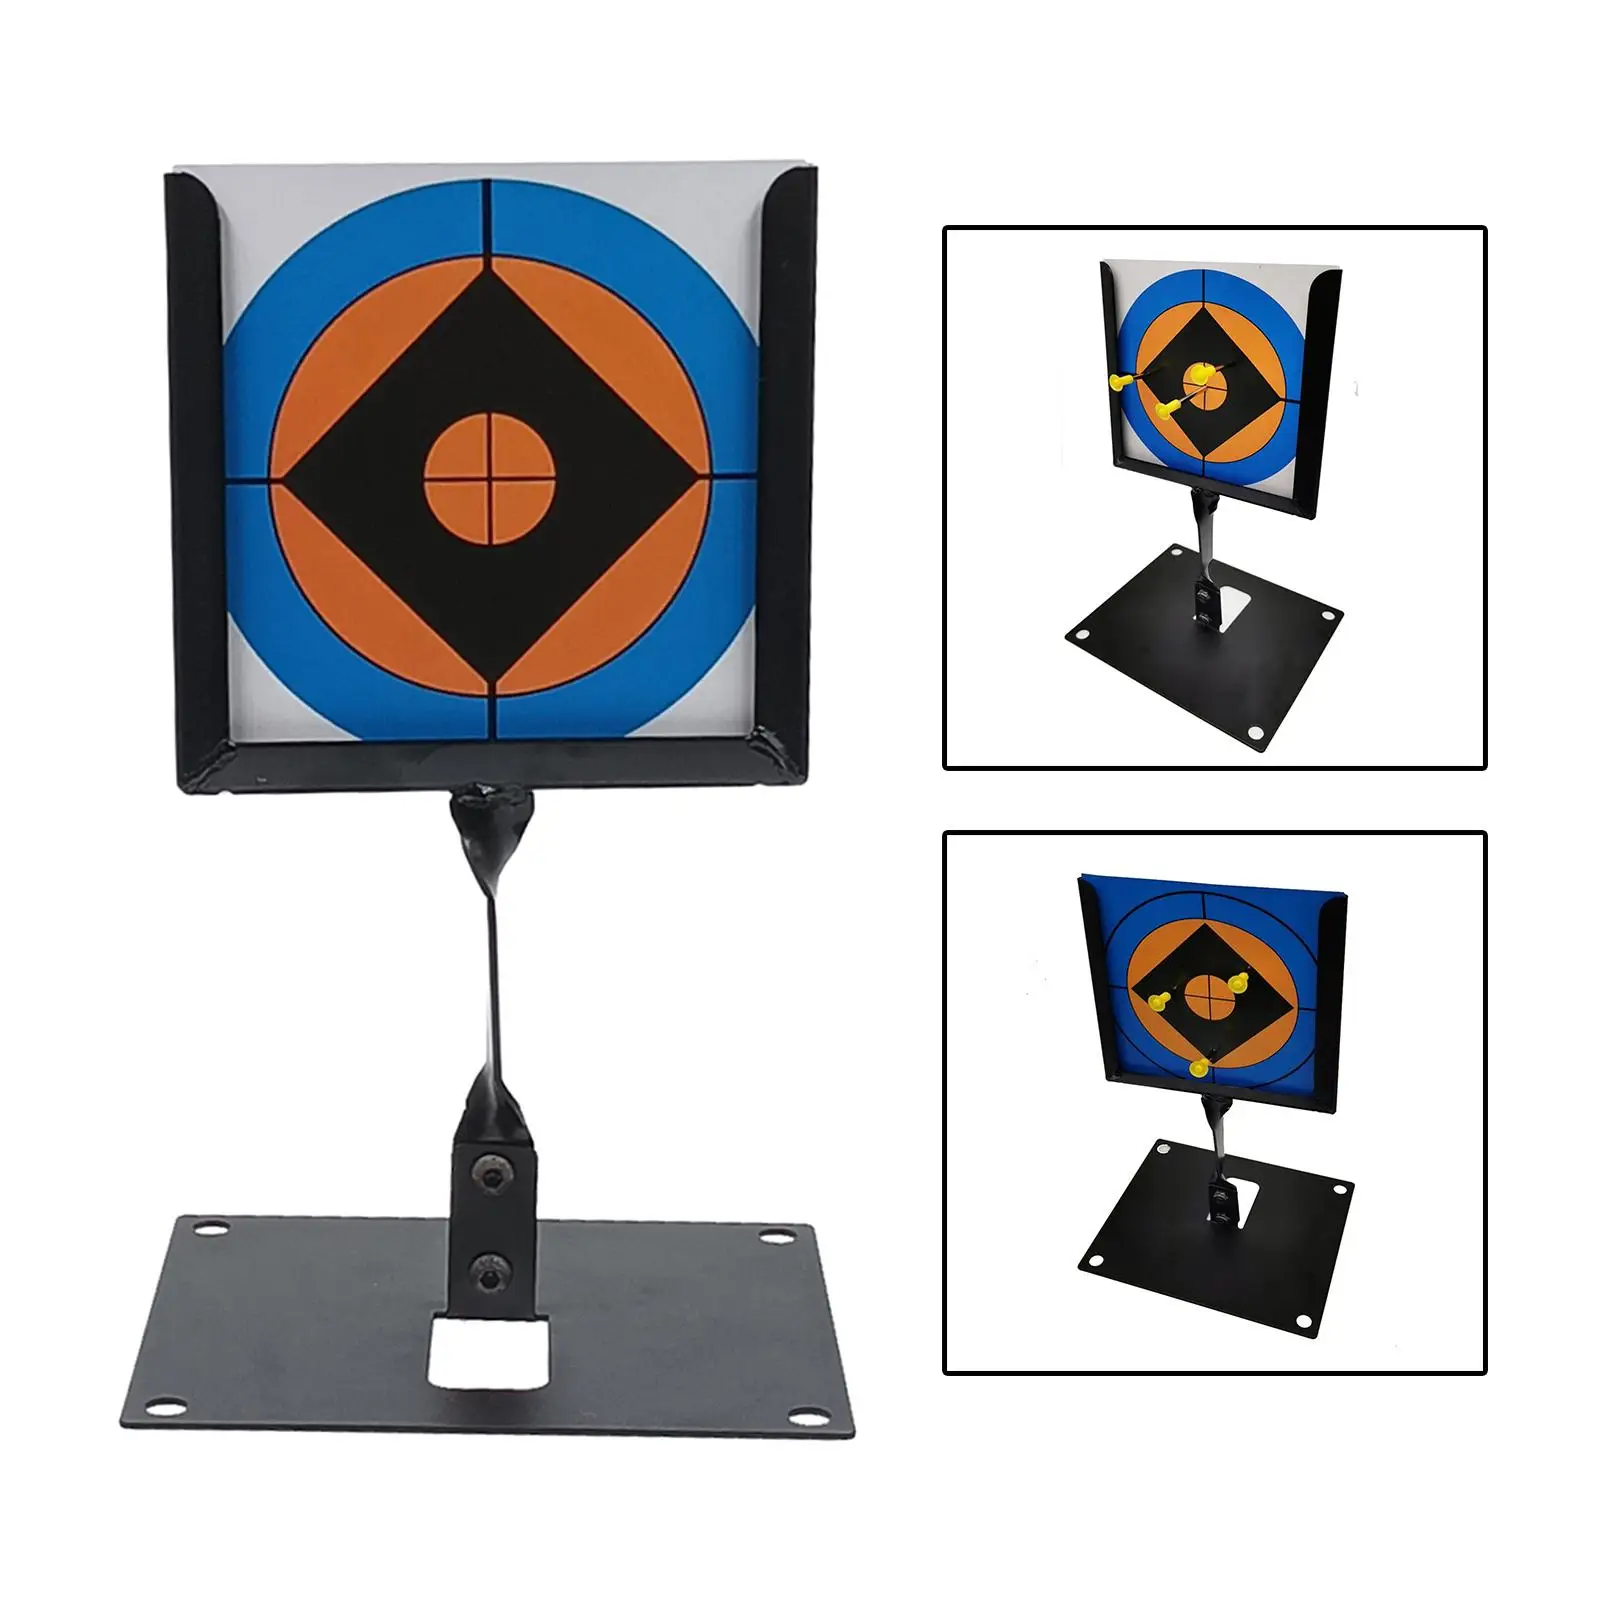 Target Stand Holder Shooting with Paper Target Range Practice Hunting Brackets Support for Patio Porch Yard Archery Lawn